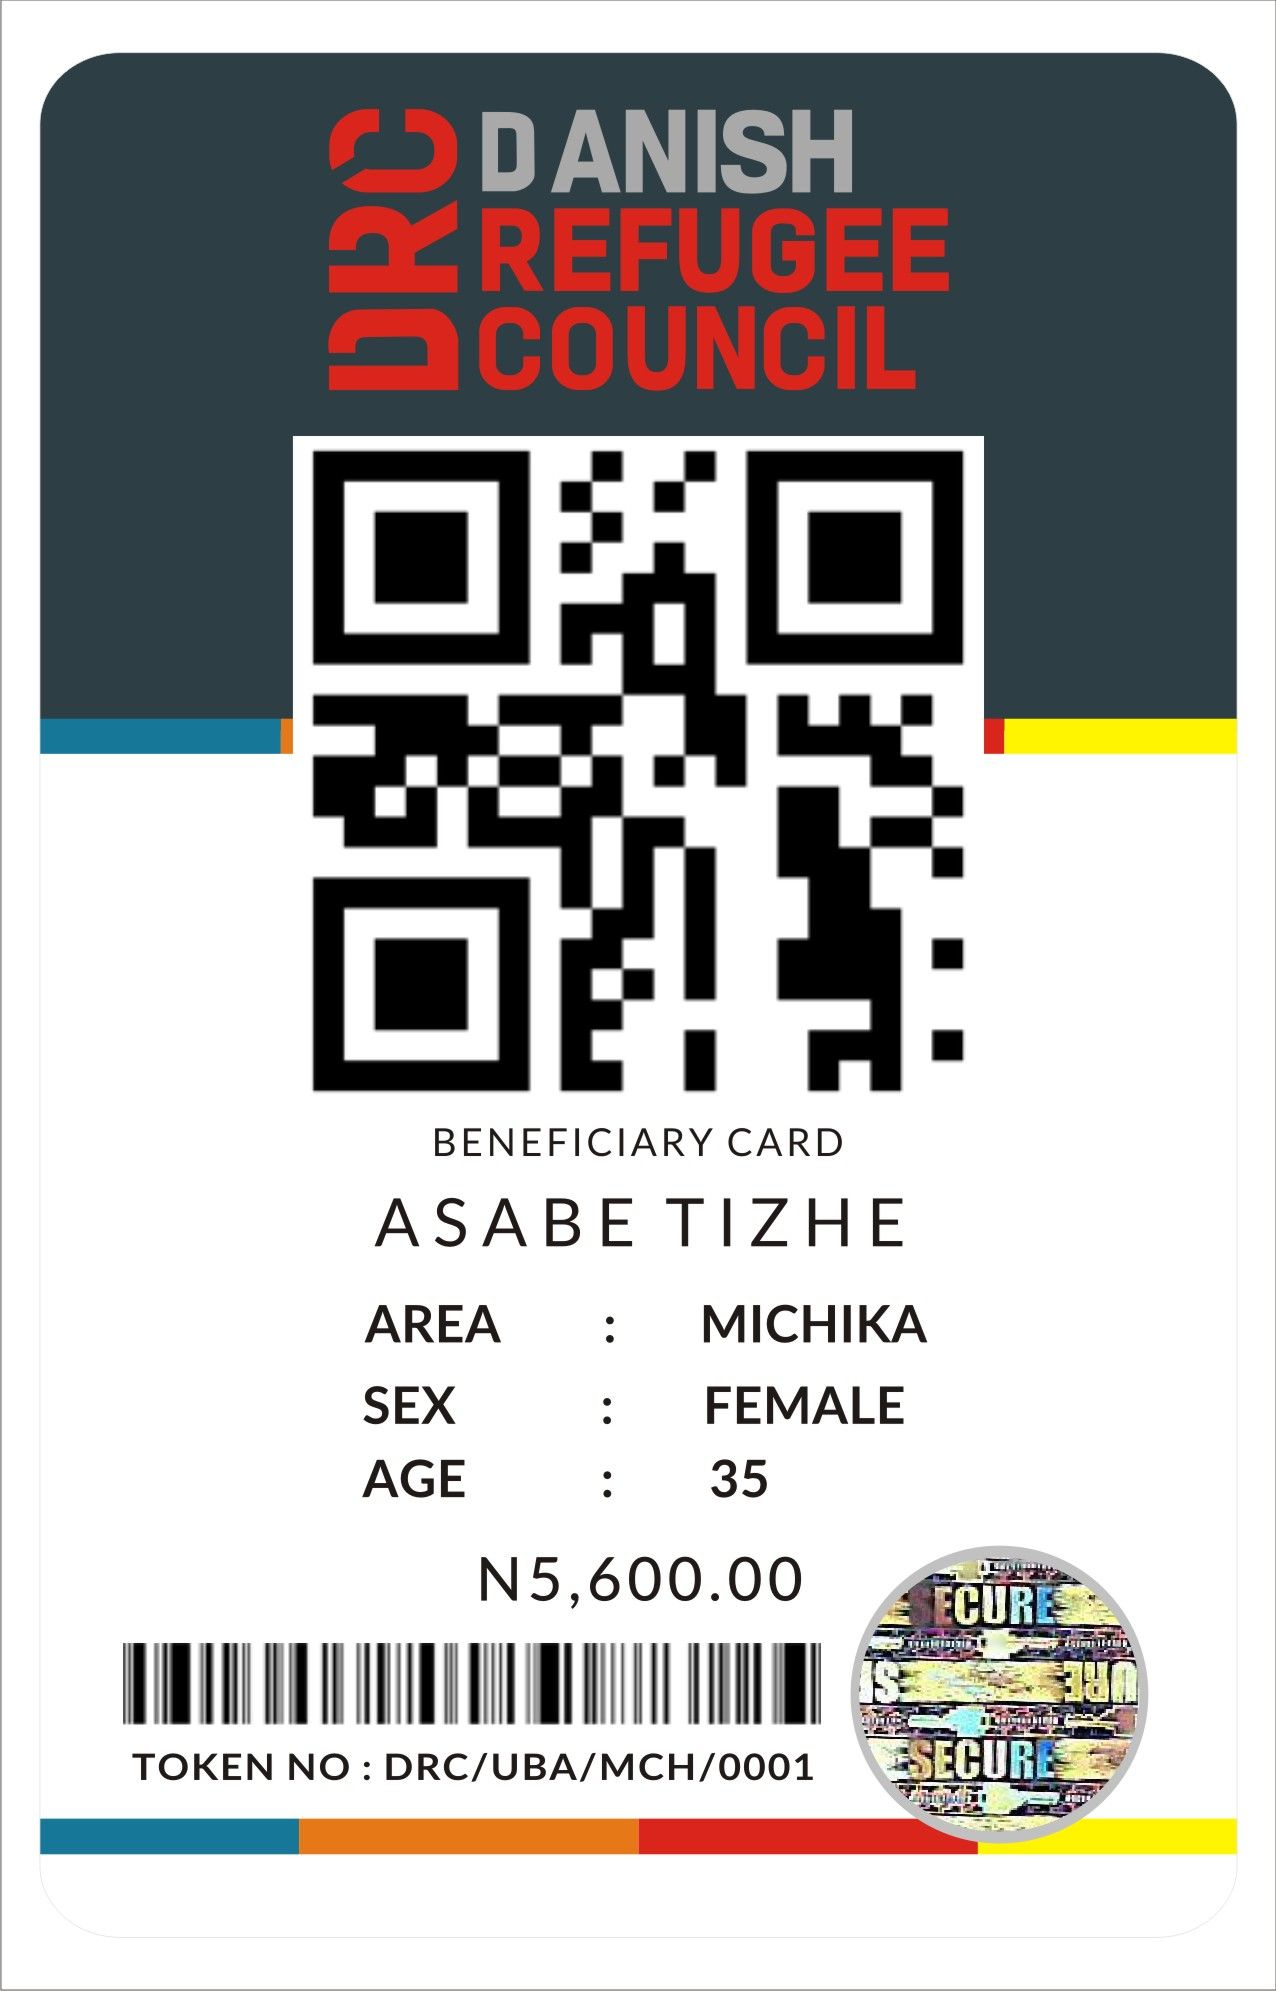 CALL CHINEDU ON 09022536974 TO PRINT BARCODE STICKERS, QR CODE LABEL STICKERS, ULTRAVIOLET SECURITY INK FEATURES, ETC